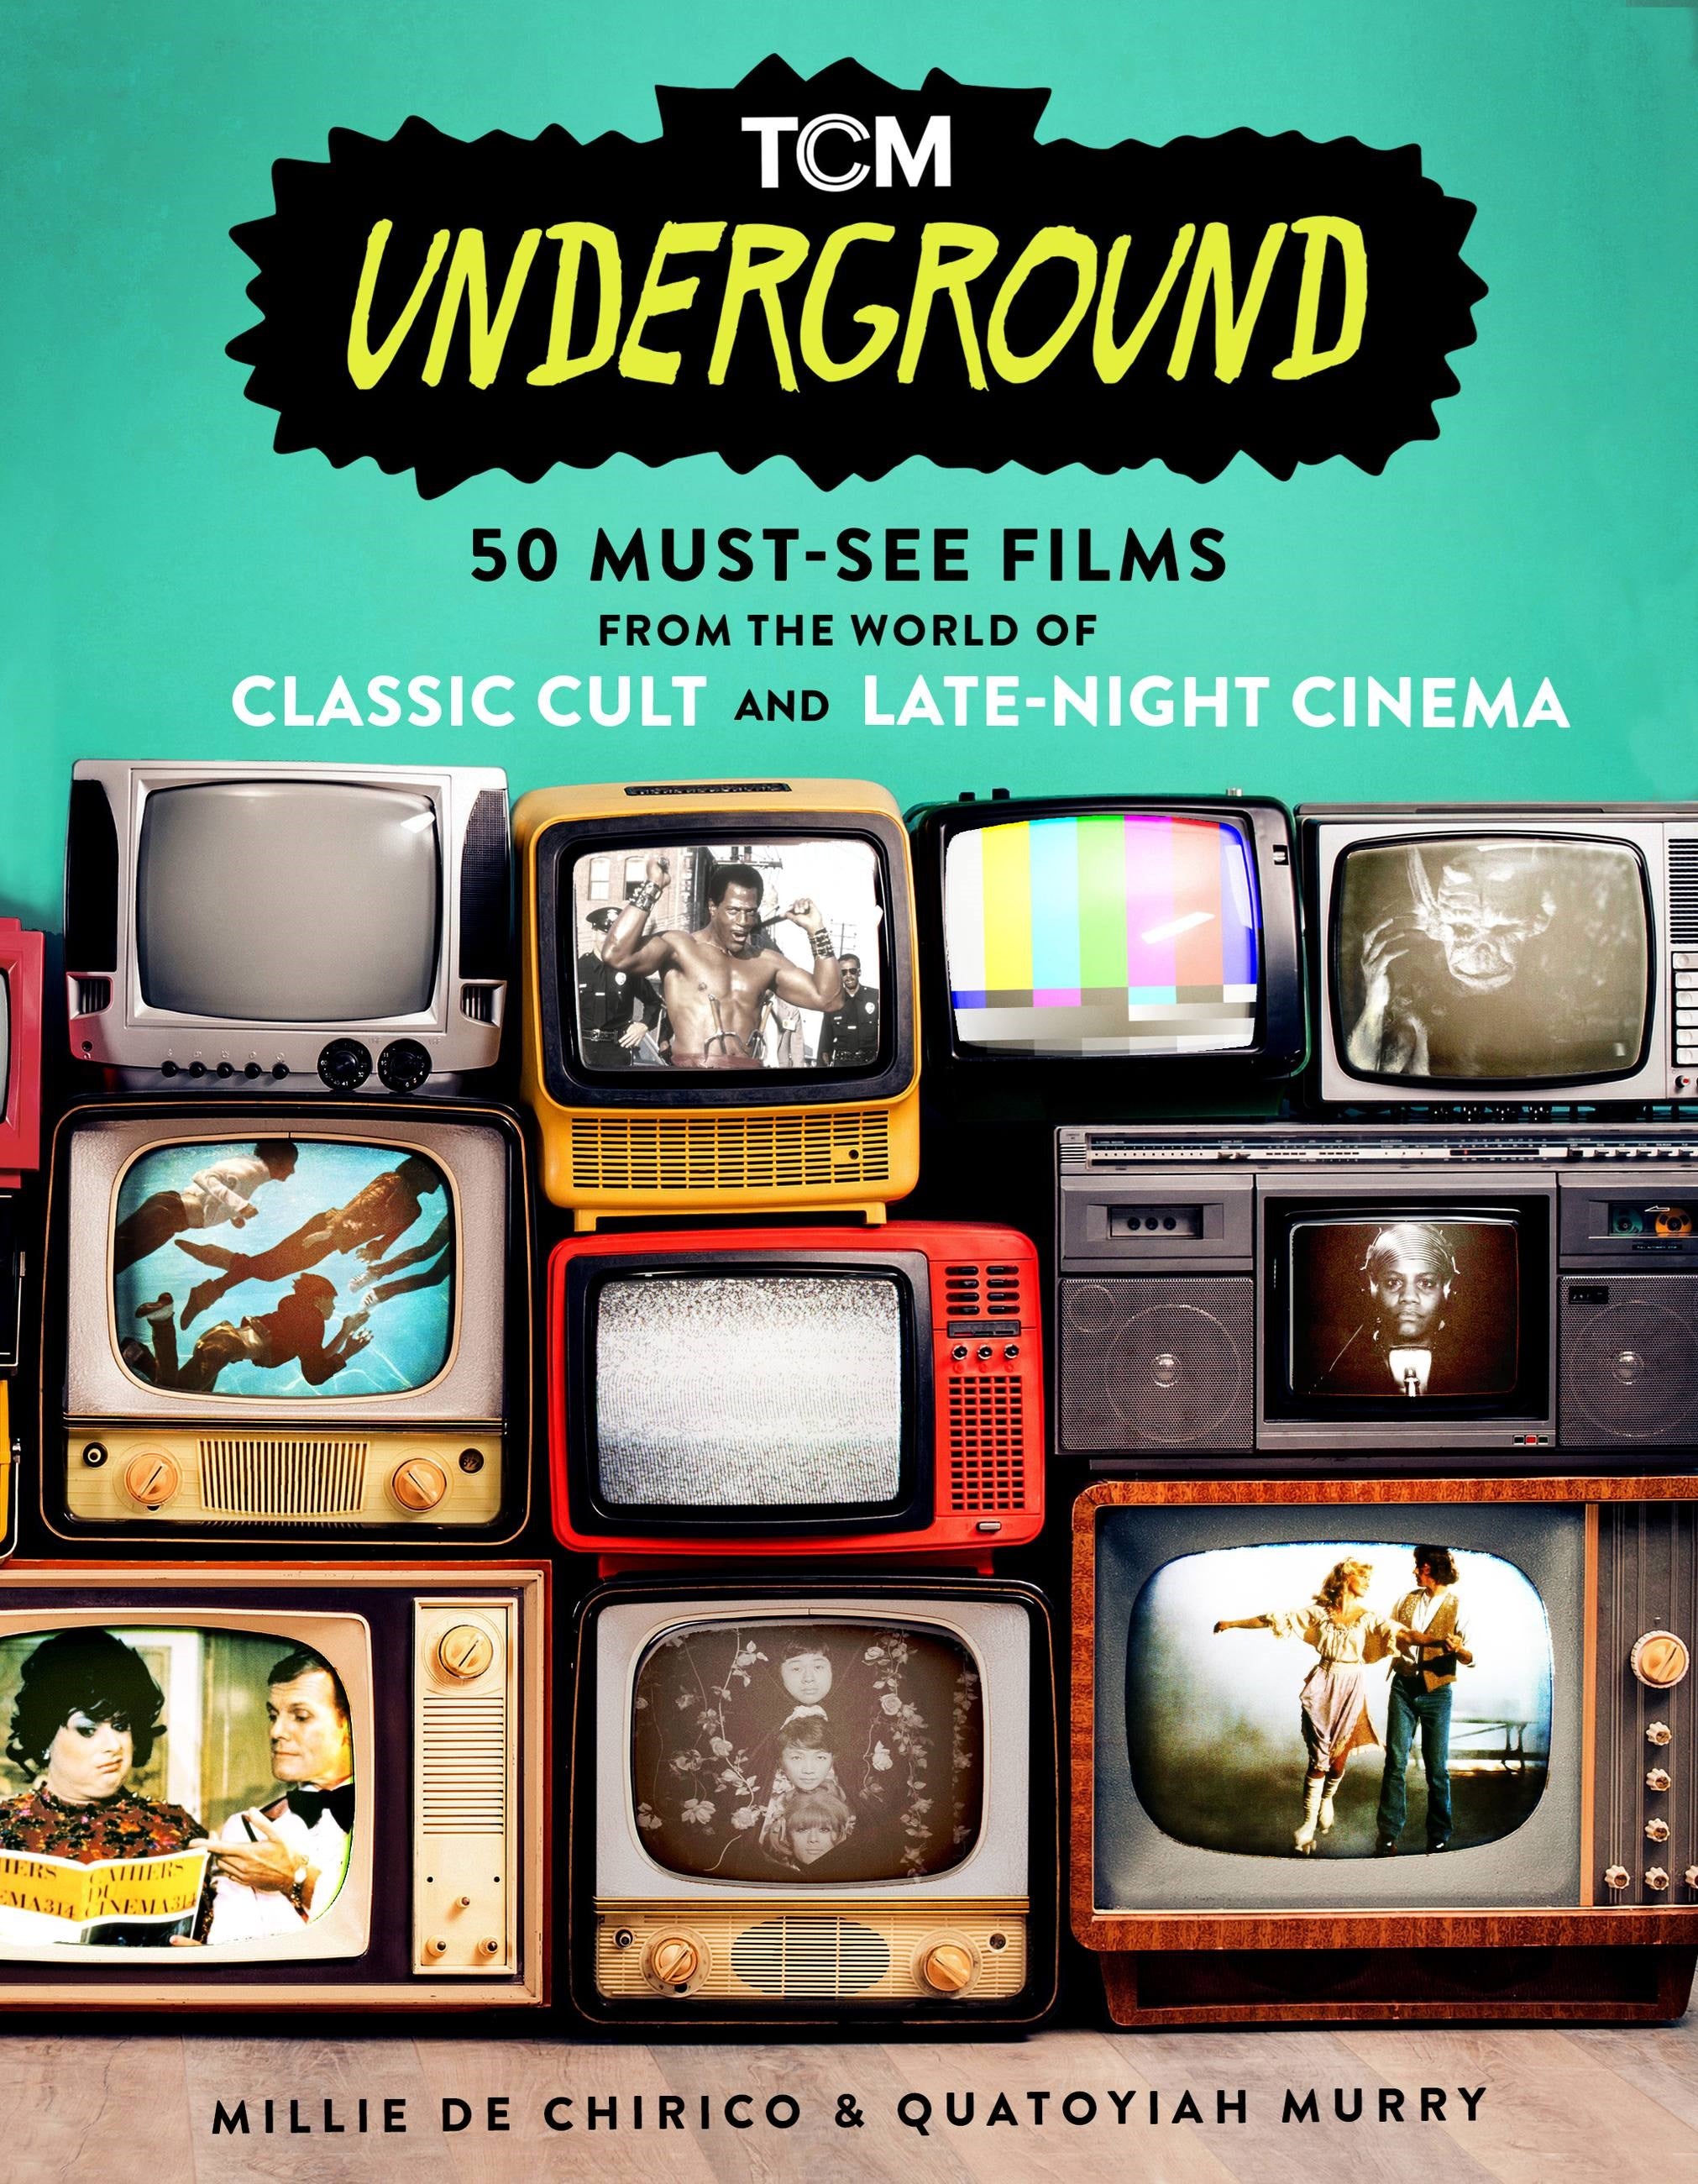 TCM Underground: 50 Must-See Films from the World of Classic Cult and Late-Night Cinema